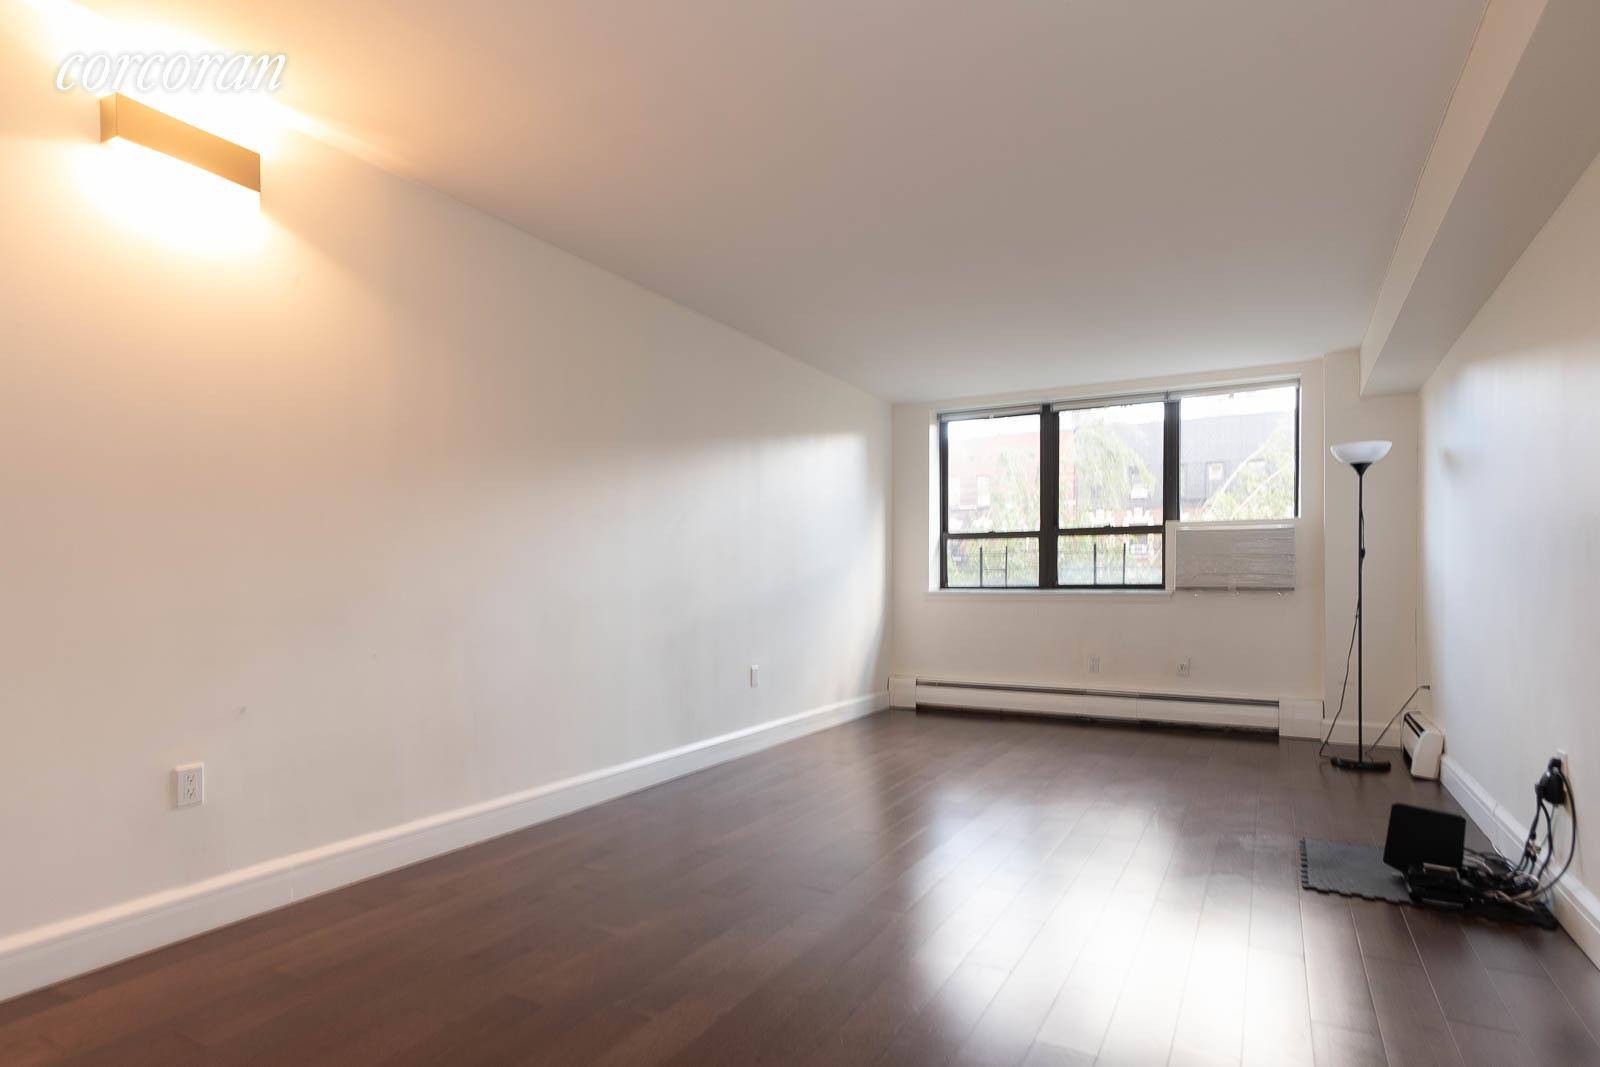 This spacious two bedroom apartment has bright windows facing South in all rooms !